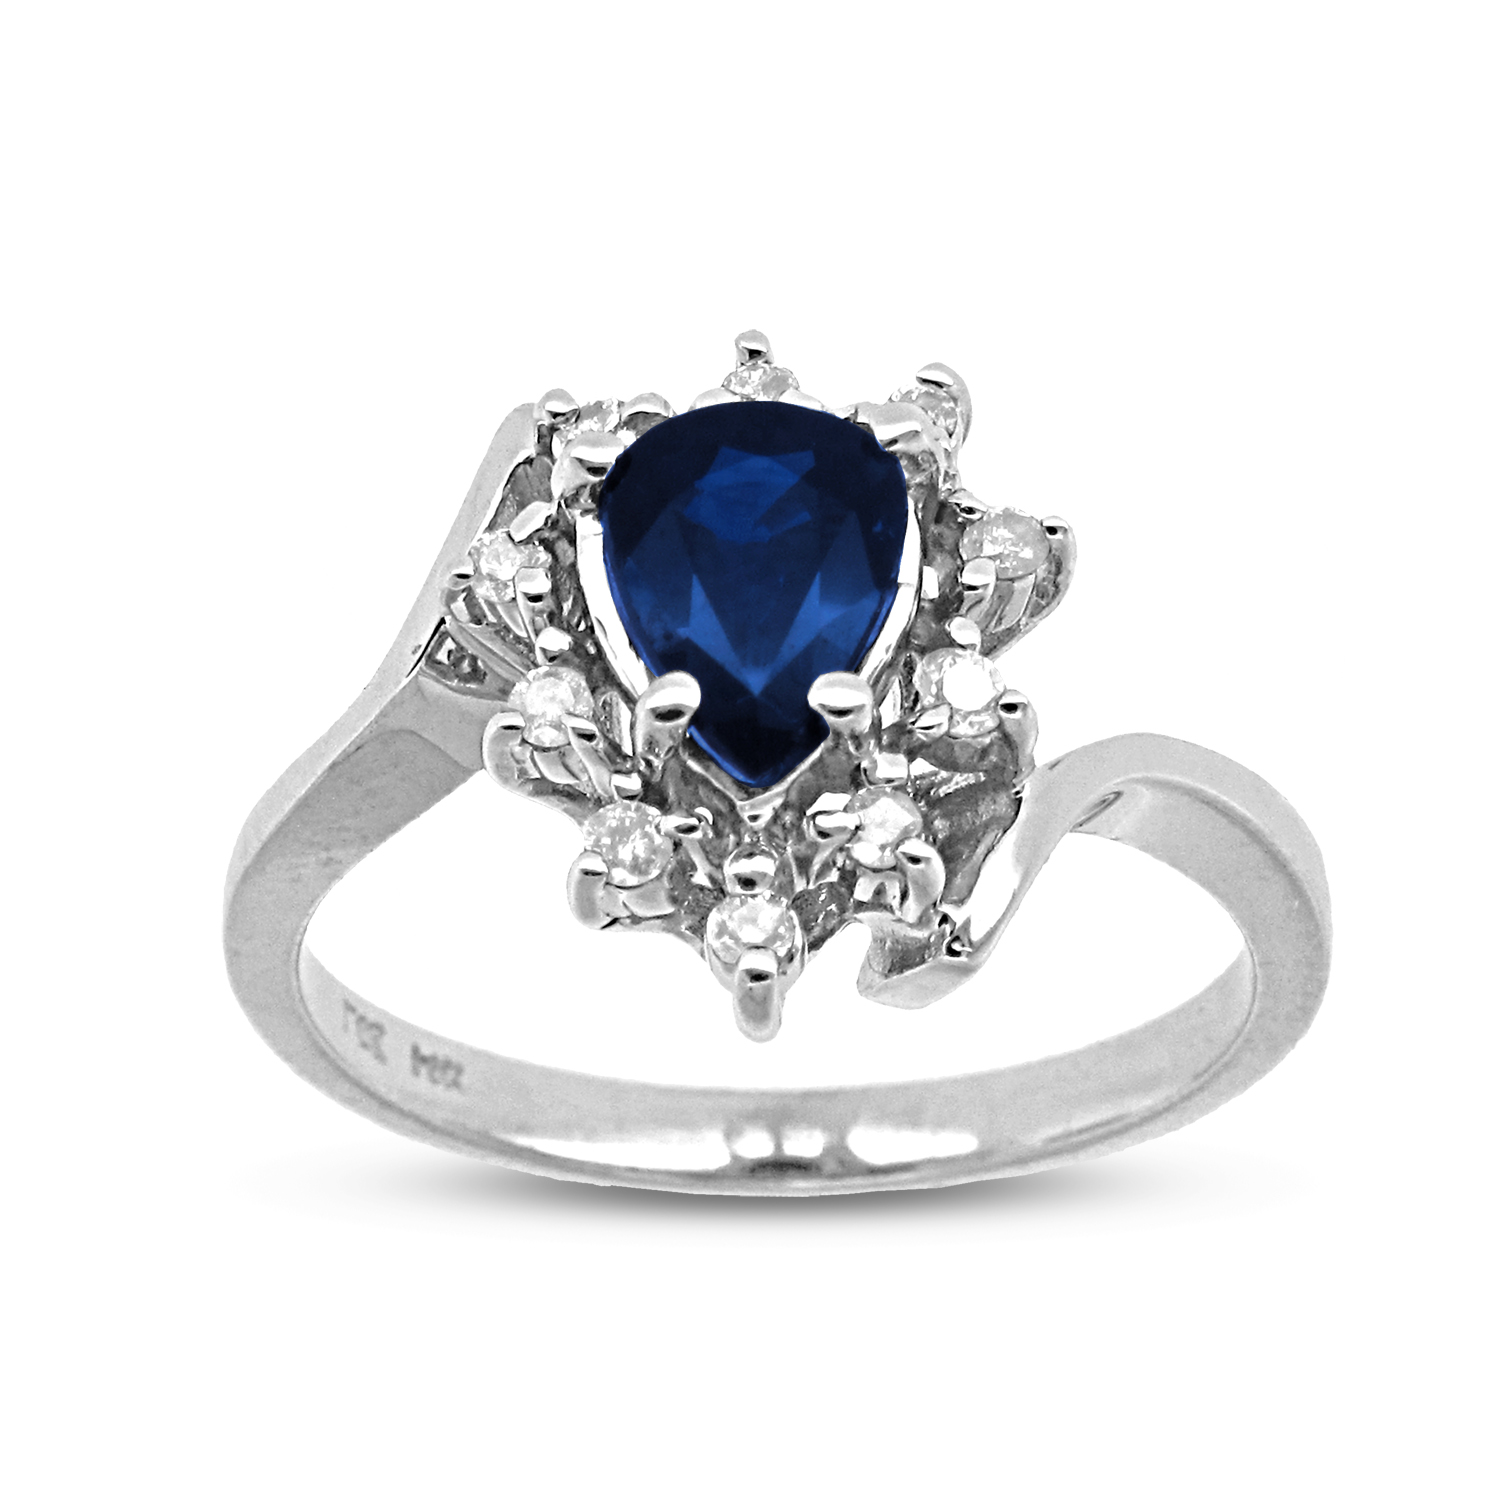 0.85cttw Pear Shaped Sapphire and Diamond Ring set in 14k Gold